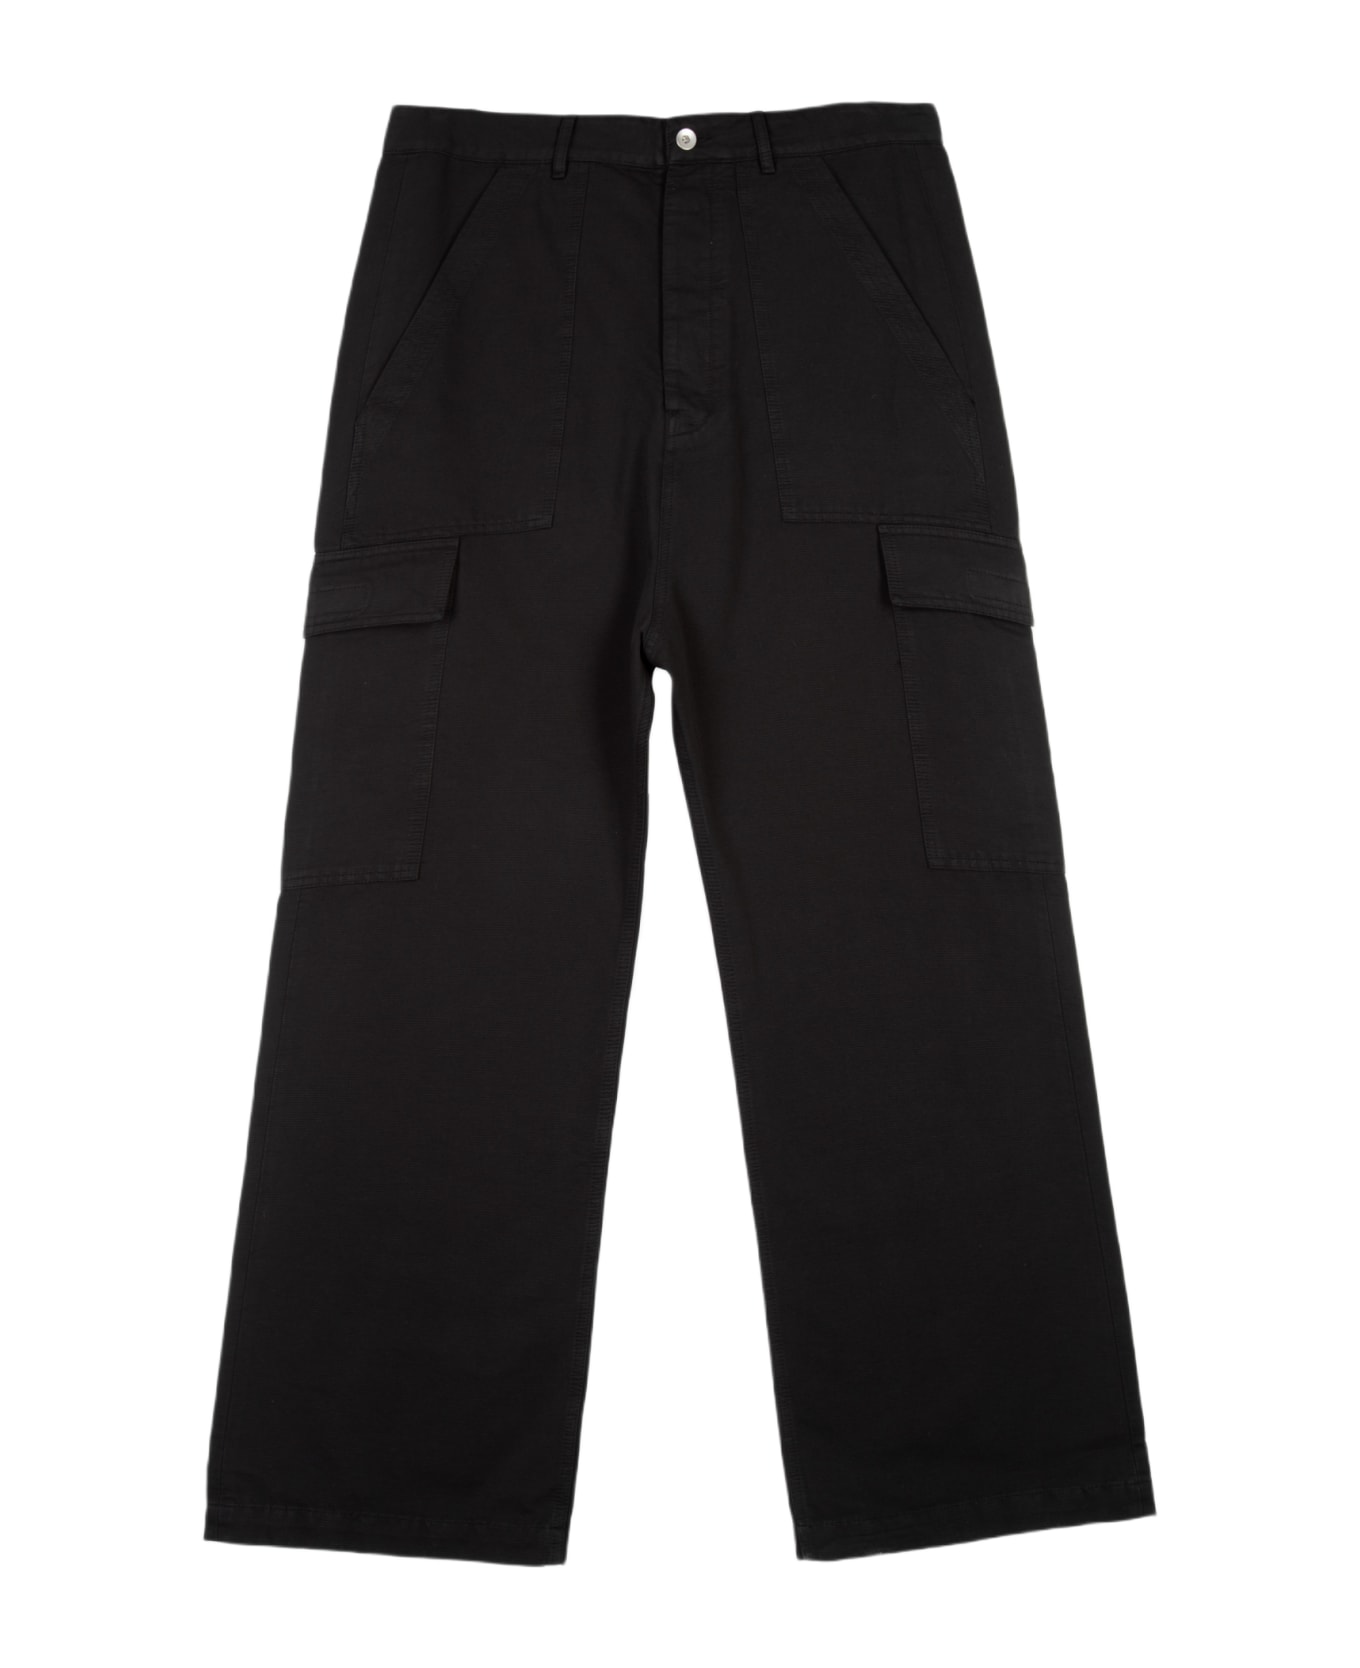 DRKSHDW Cargo Trousers Black Cotton Cargo Pant - Cargo Trousers - Nero ボトムス